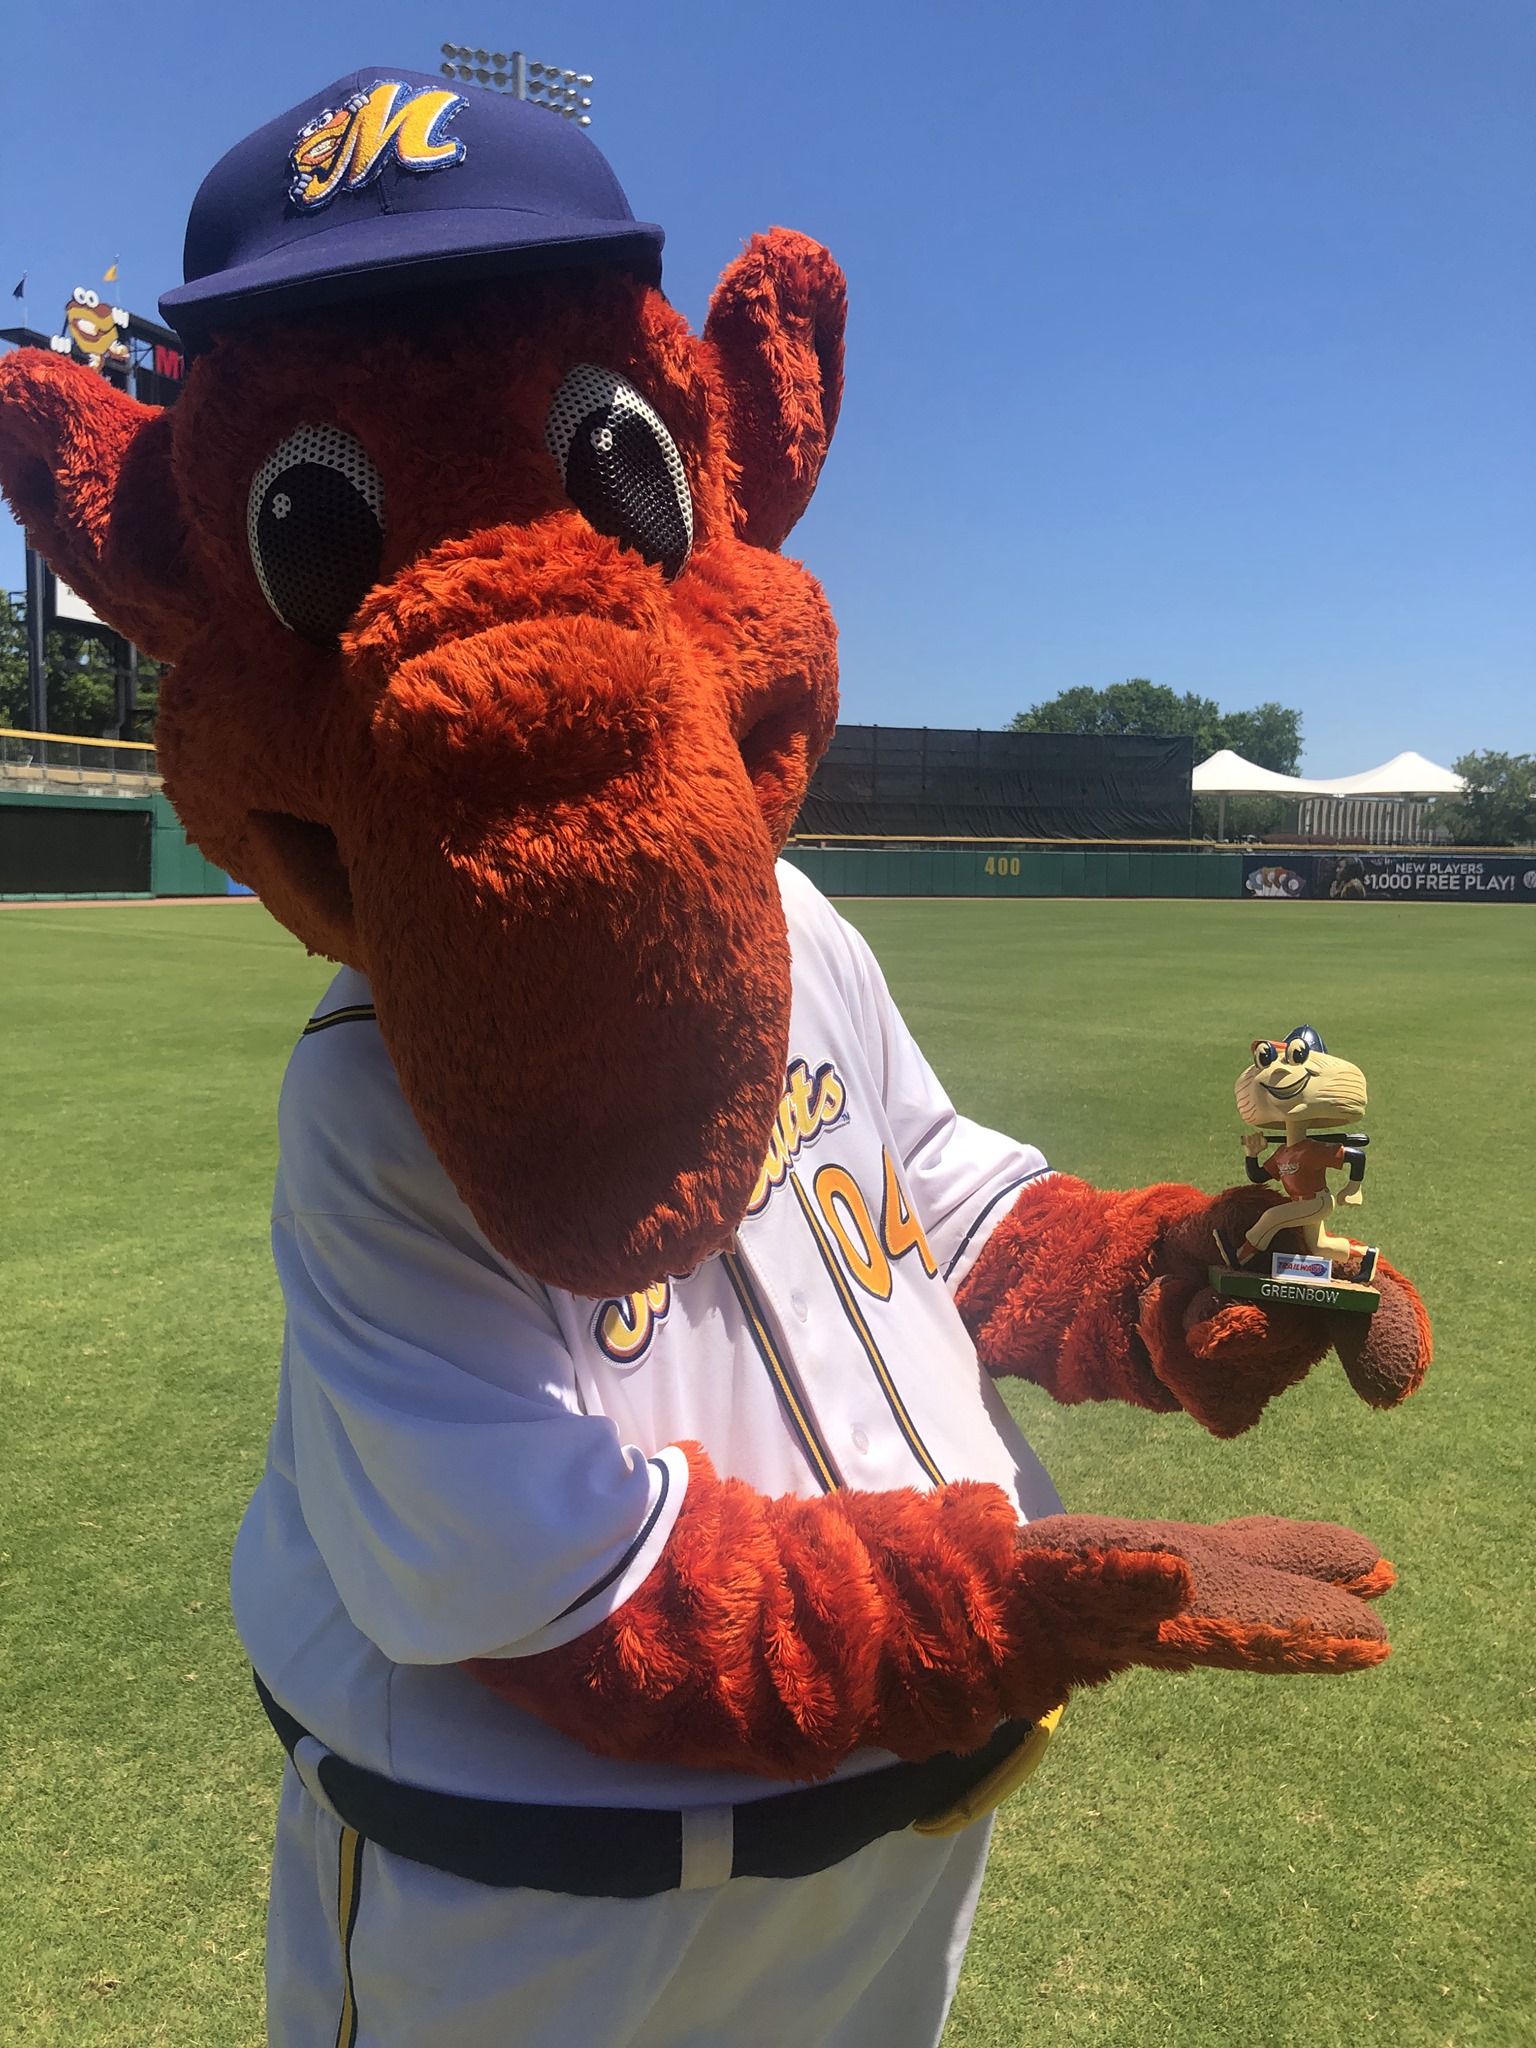 Montgomery Biscuits release 2021 promo schedule. Here are the details